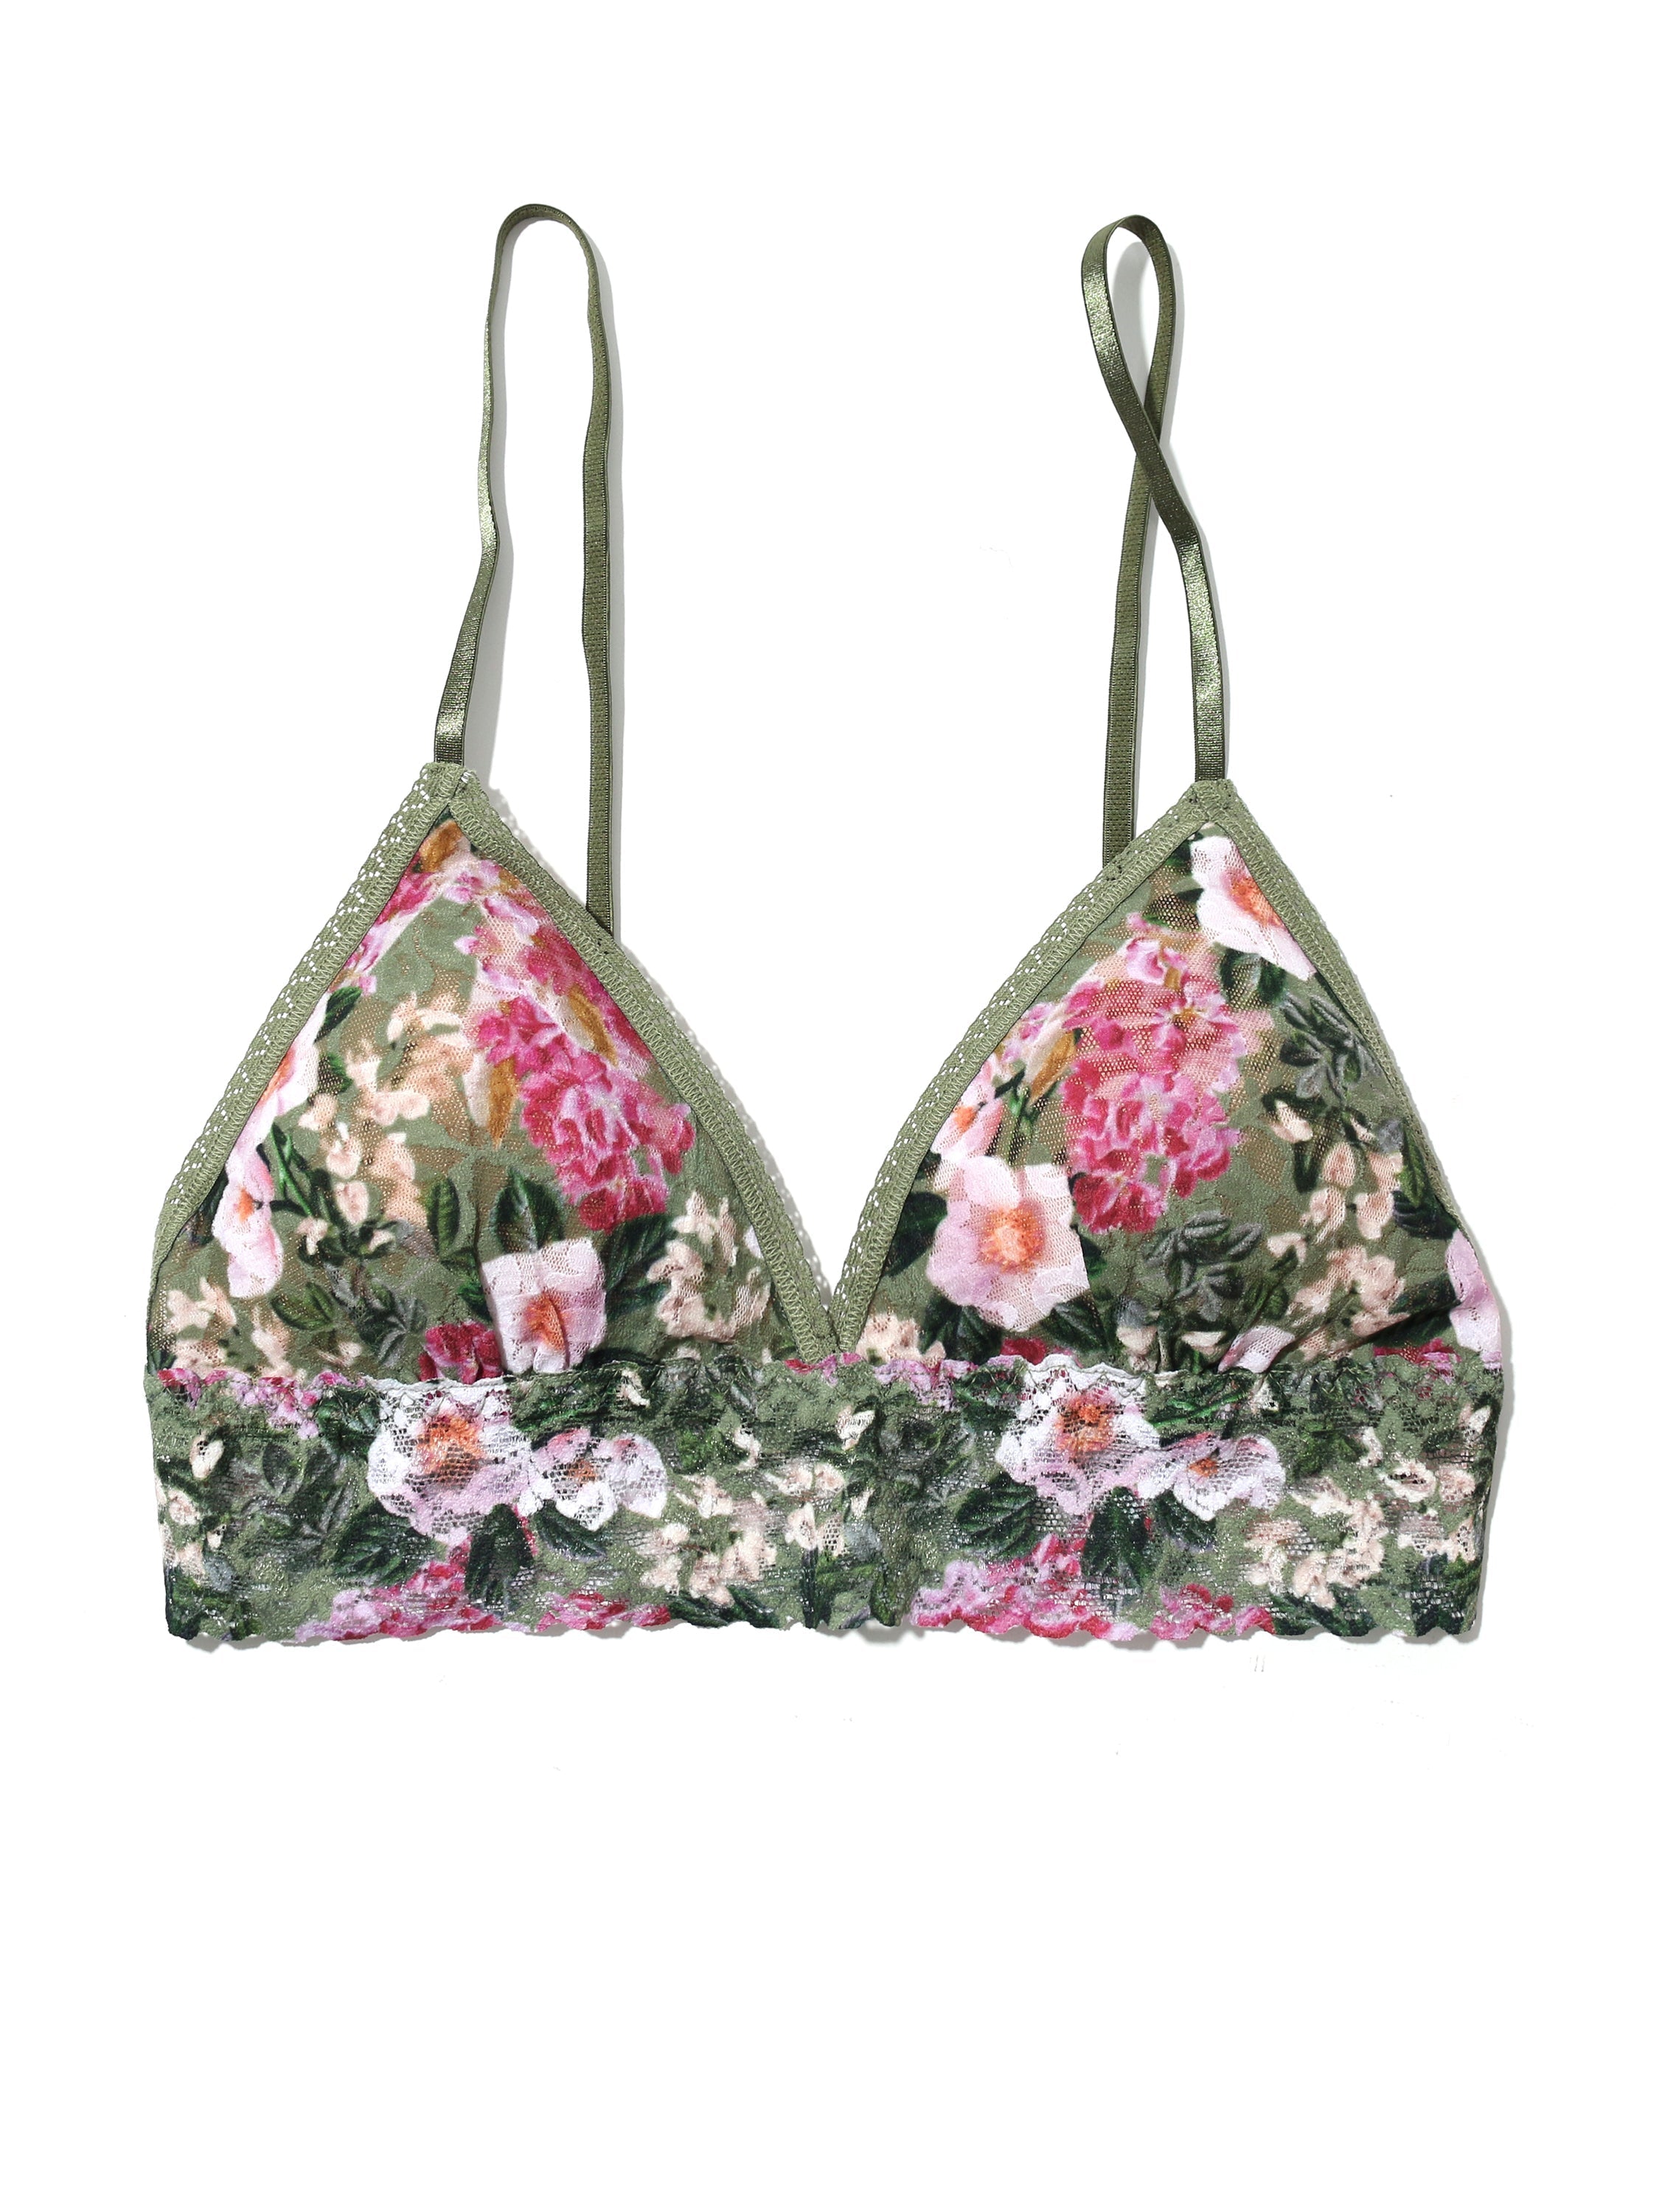 Shiny Metallic Daisy Floral Trim Triangle Bralette And Panty Set